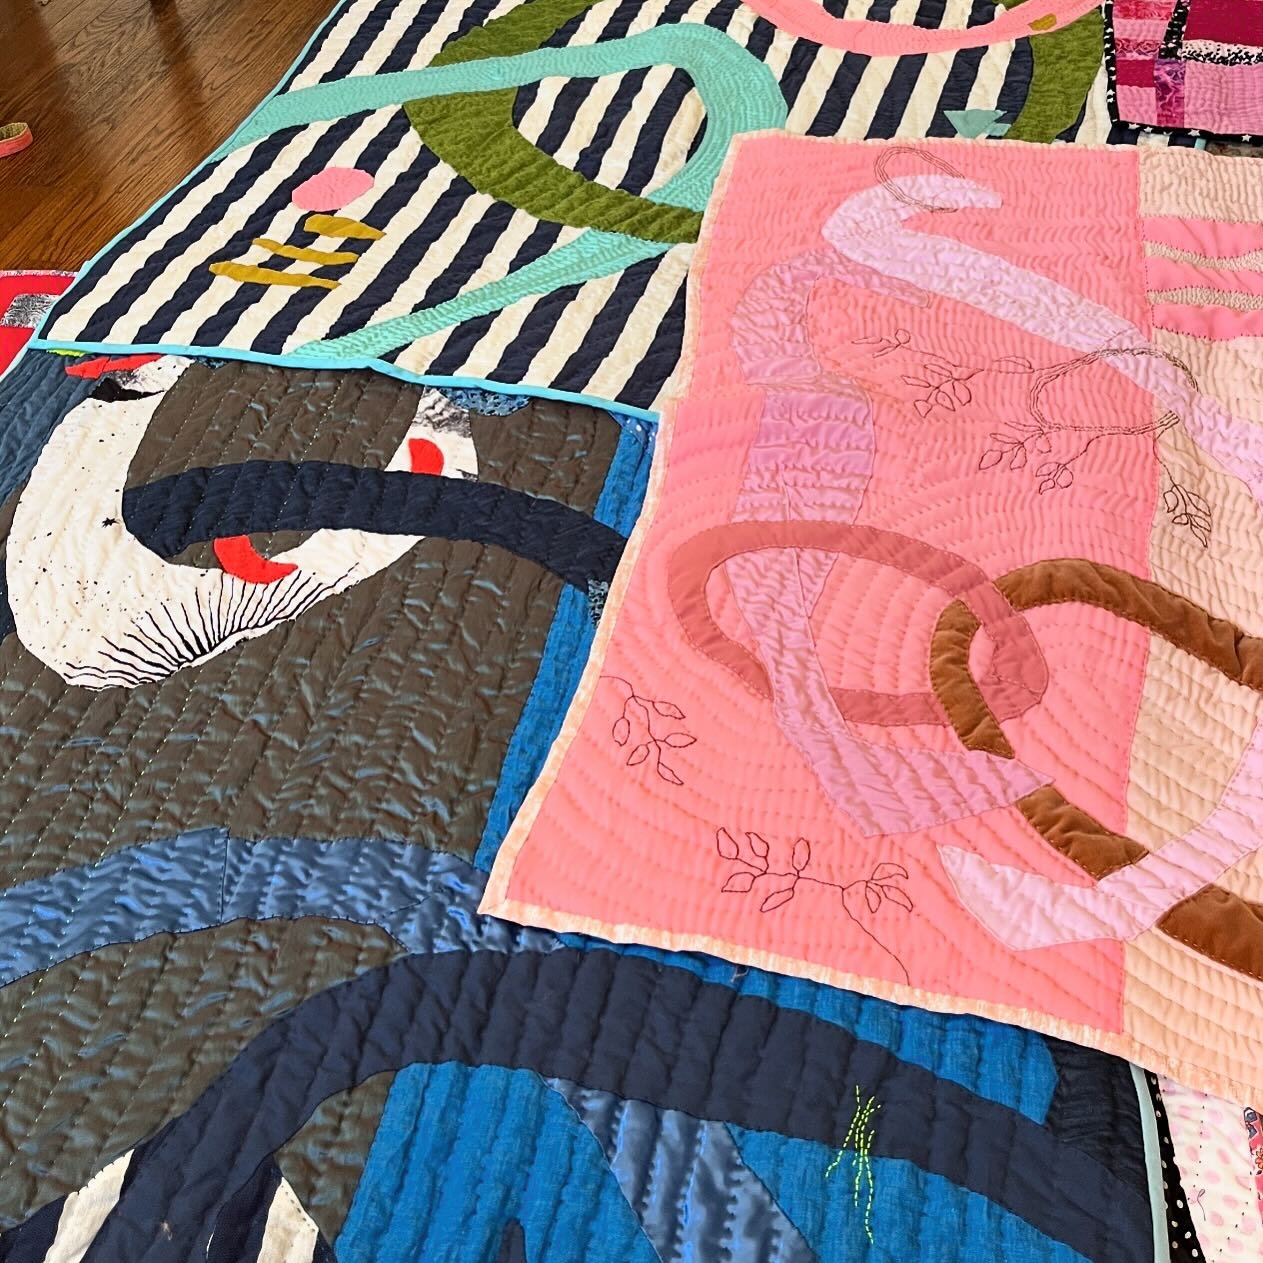 I&rsquo;m in the process of attaching sleeves to some of the newer quilts I&rsquo;m showing along with the work of @fern_royce and other artists at the @hiddenvilla sheep shearing and fiber fest on April 27. Here&rsquo;s a partial view of the first t